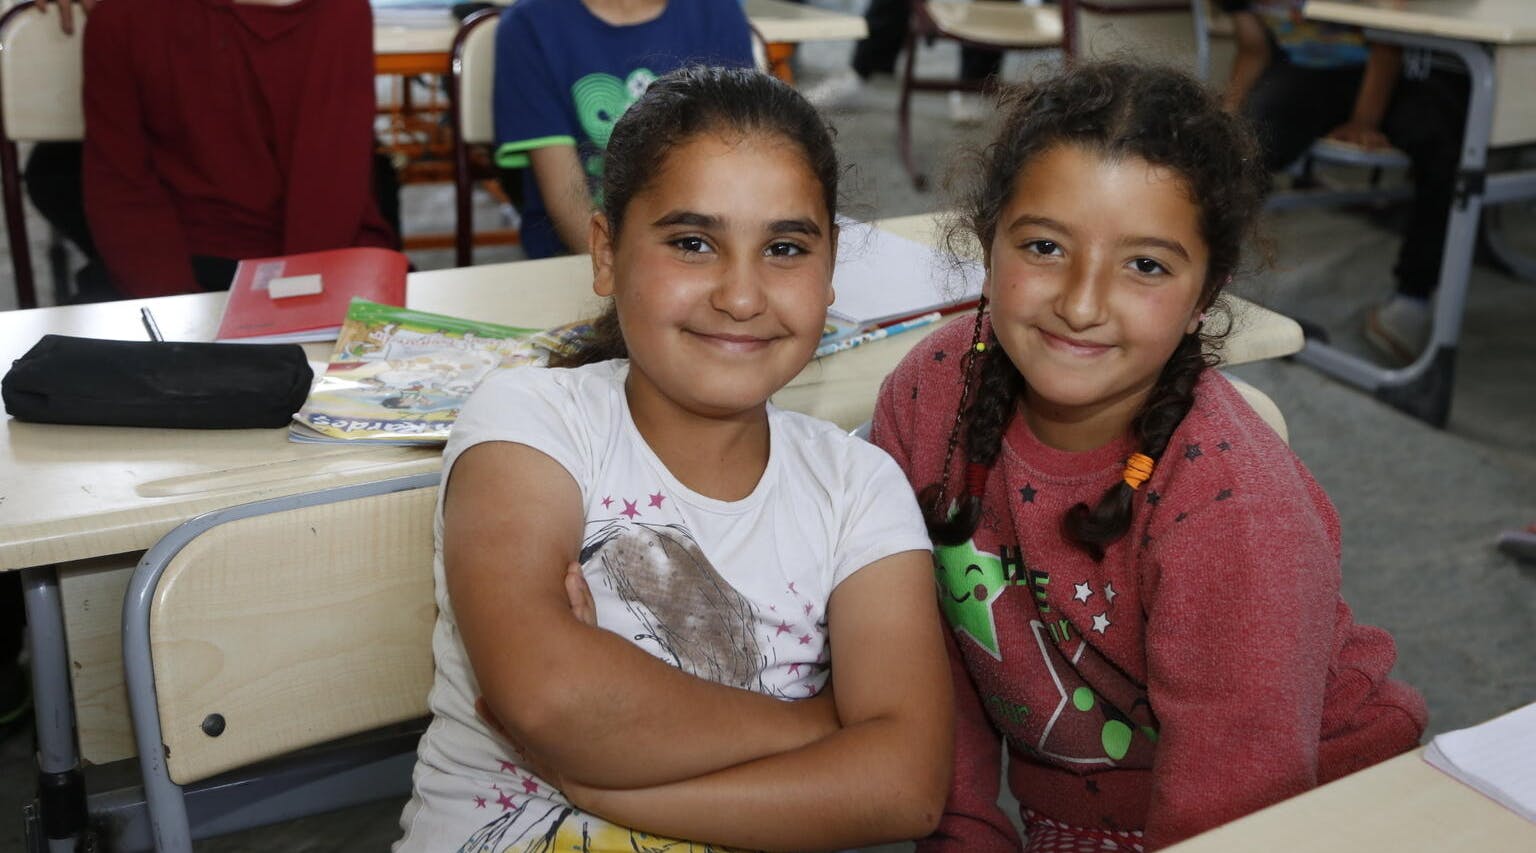 Türkiye-Syria Earthquake Emergency, Two friends attend a class held at a UNICEF-supported tent classroom in Hatay, Türkiye. 